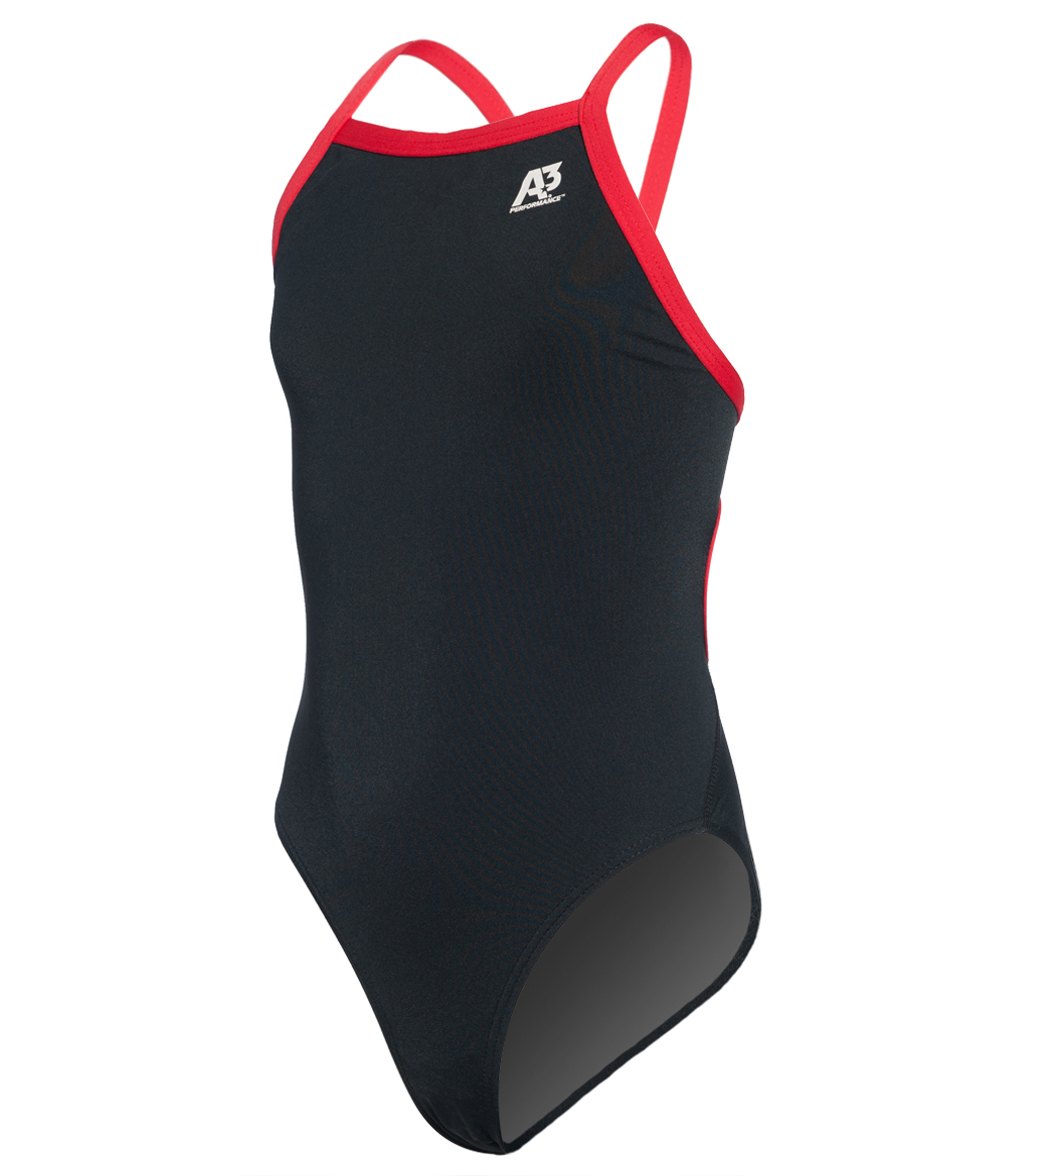 A3 Performance Female Youth X-Back Poly Swimsuit w/ Contrast Trim at ...